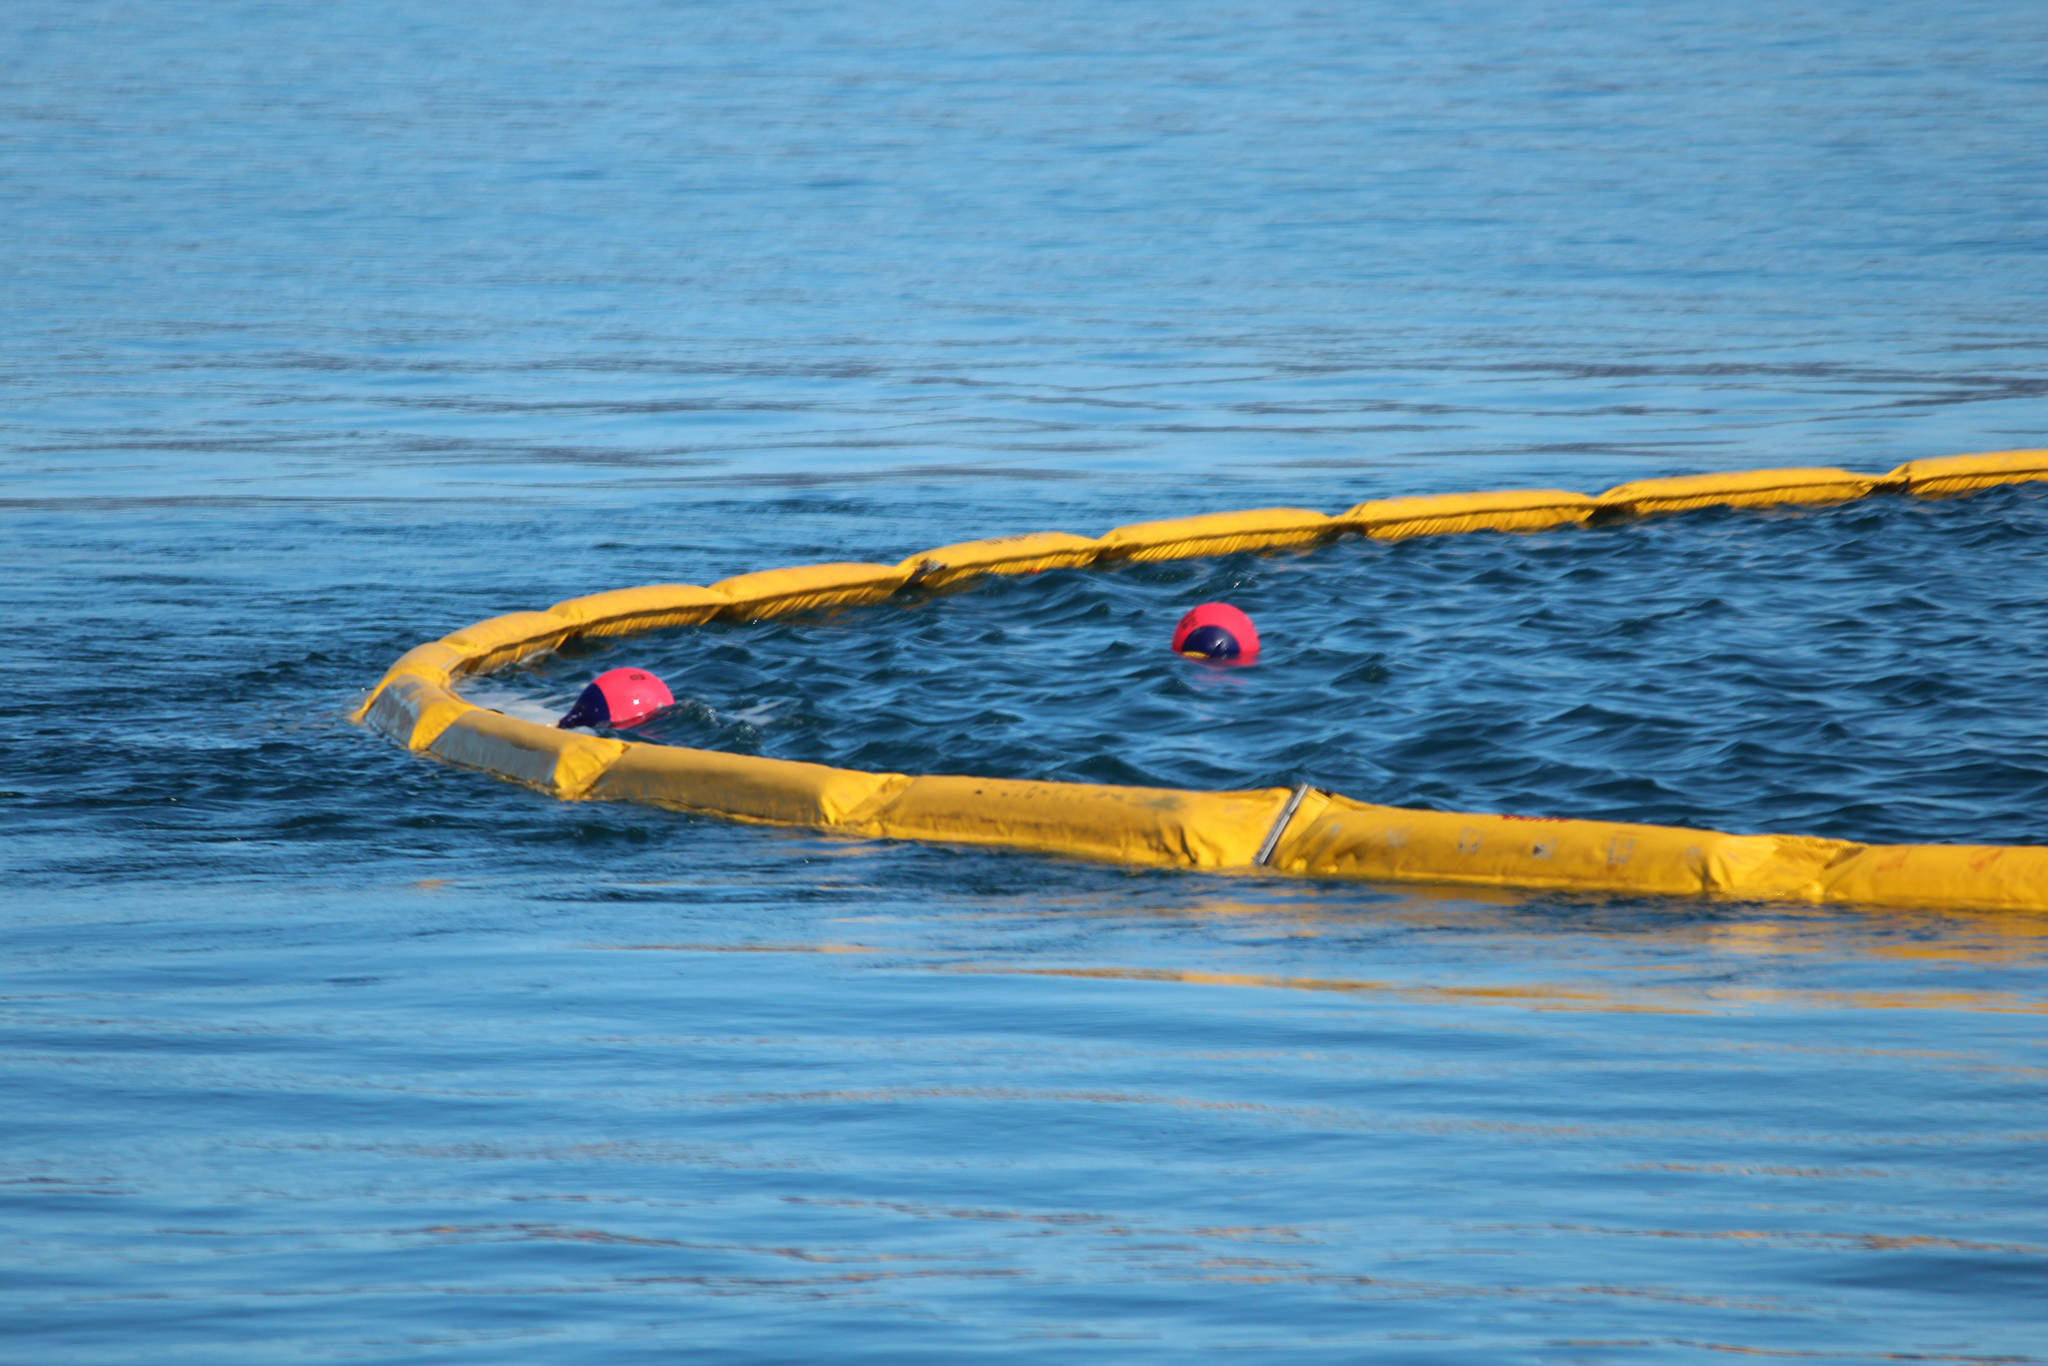 The apex of a boom holds two buoys placed in the water to simulate areas of oil slick fishing vessels needed to aim for during annual oil spill response training held Saturday, April 14, 2018 in Homer, Alaska. Vessels need to tow boom slowly to avoid turbulent water at the apex of the boom, which can allow oil to slip out the back. (Photo by Megan Pacer/Homer News)